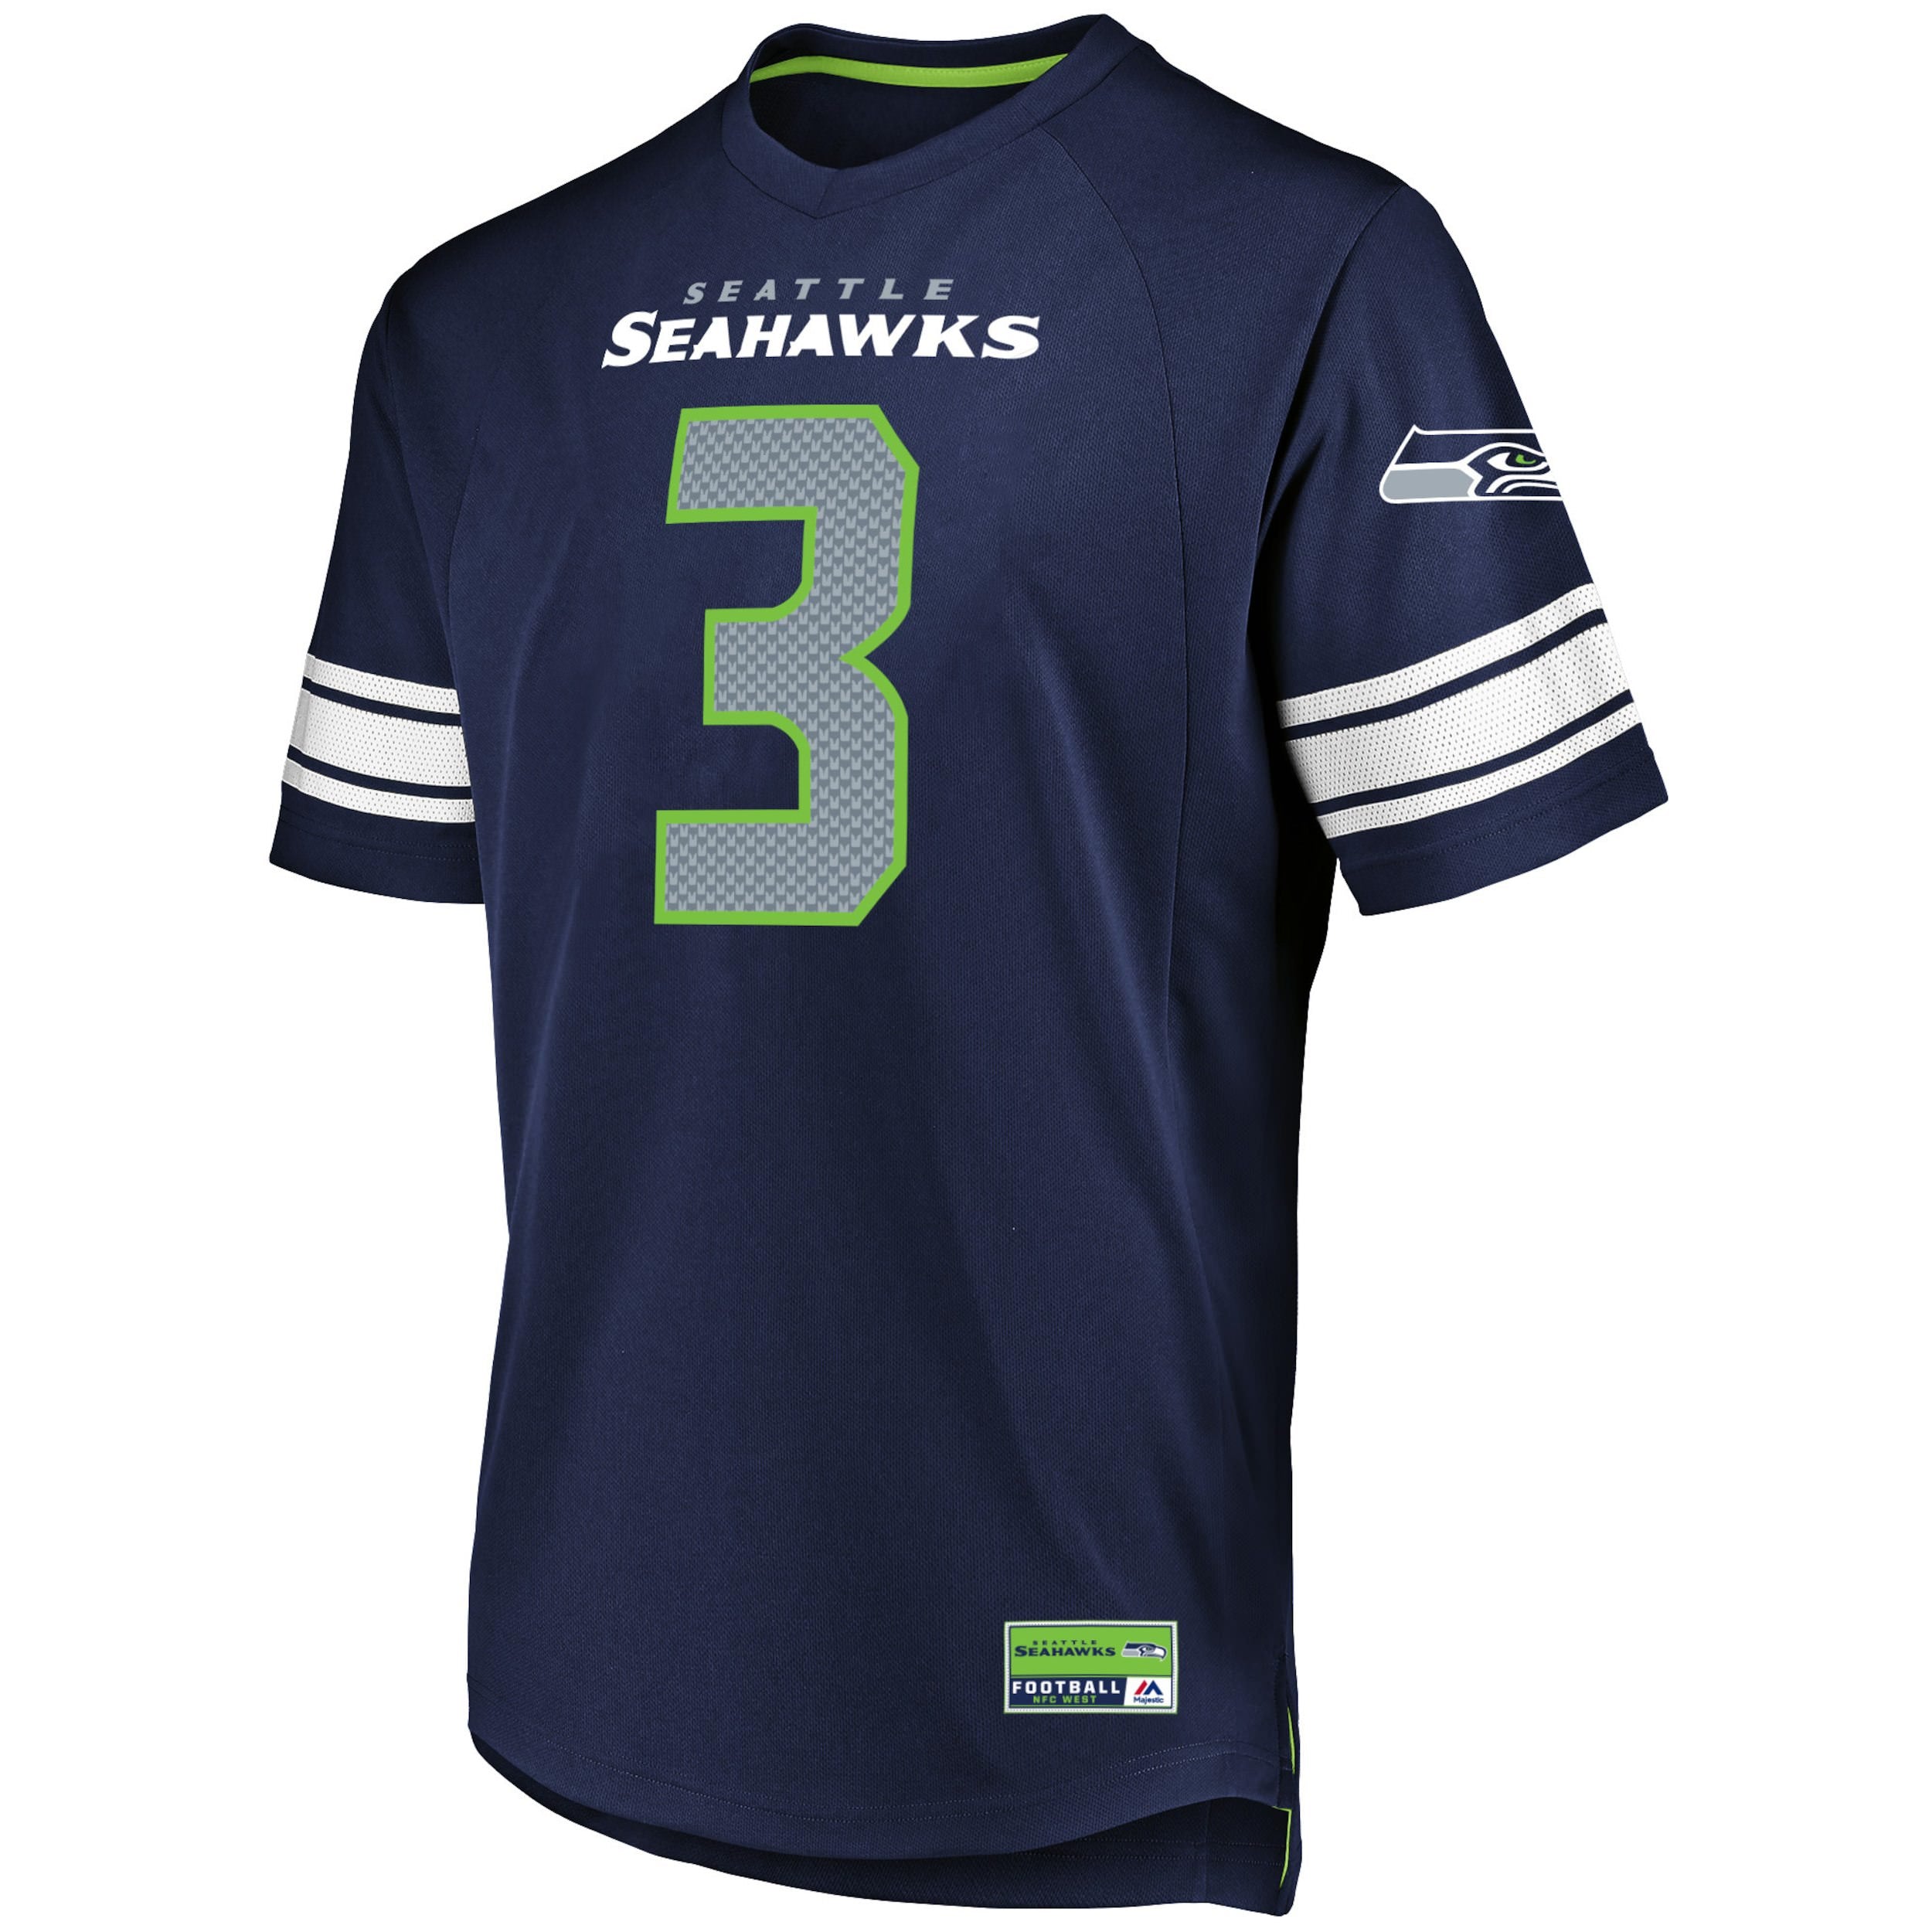 russell wilson jersey number